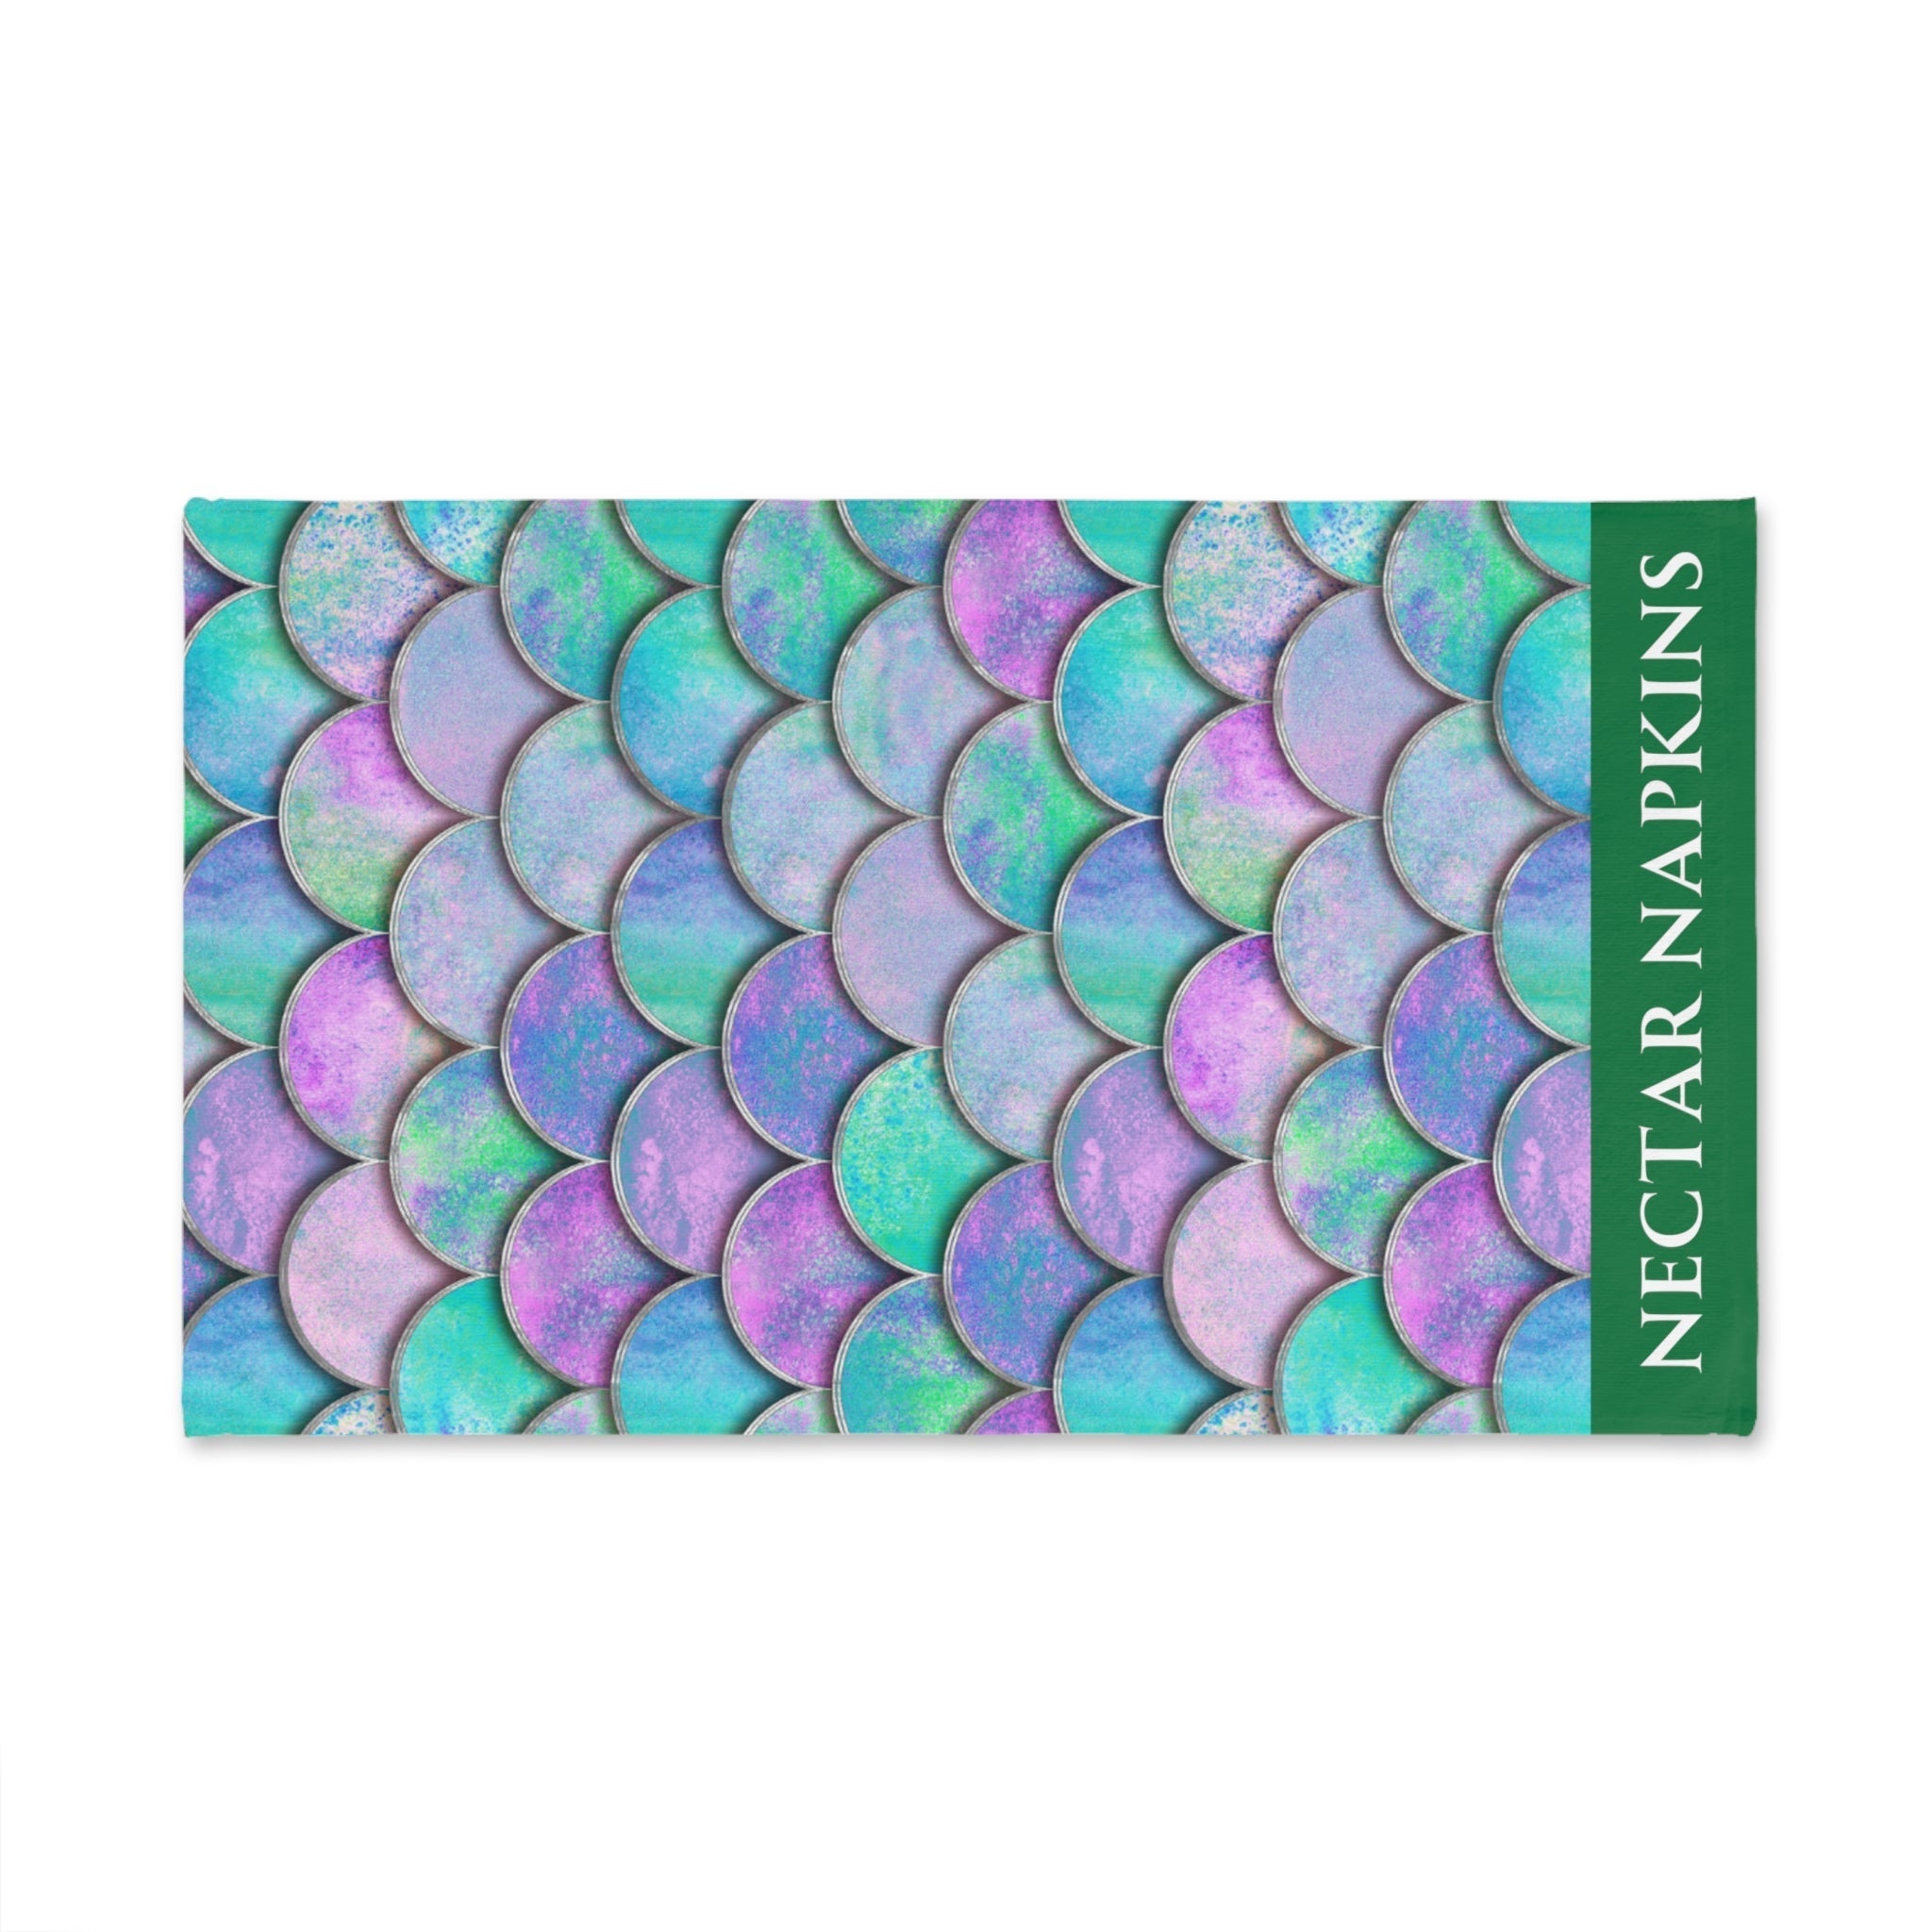 Mermaid Scale  Green | Anniversary Wedding, Christmas, Valentines Day, Birthday Gifts for Him, Her, Romantic Gifts for Wife, Girlfriend, Couples Gifts for Boyfriend, Husband NECTAR NAPKINS